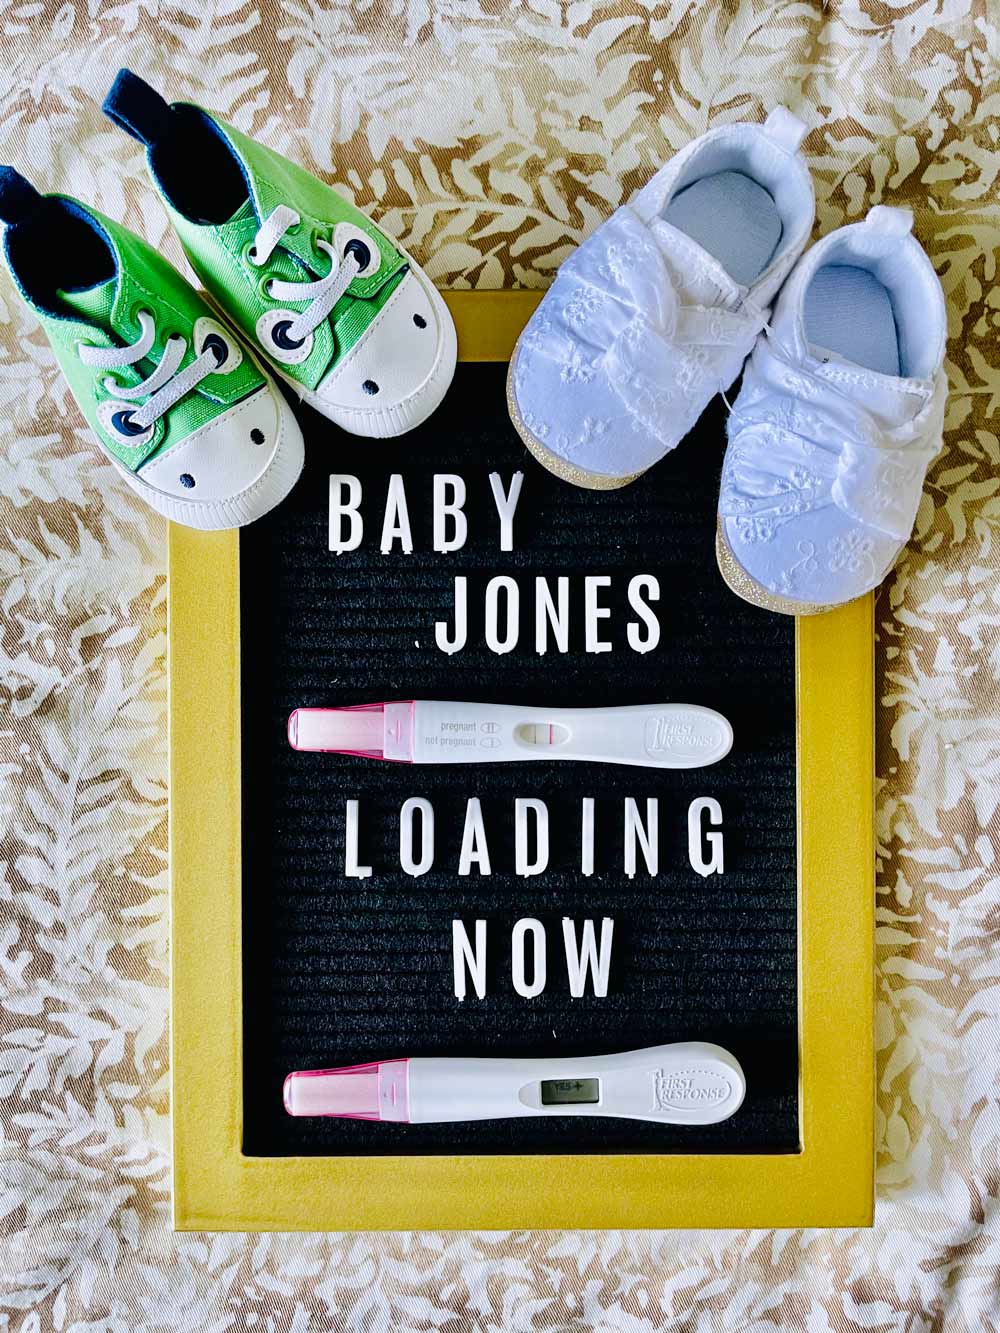 image of a message board that says "Baby Jones loading now" with pregnancy tests and baby shoes on top.